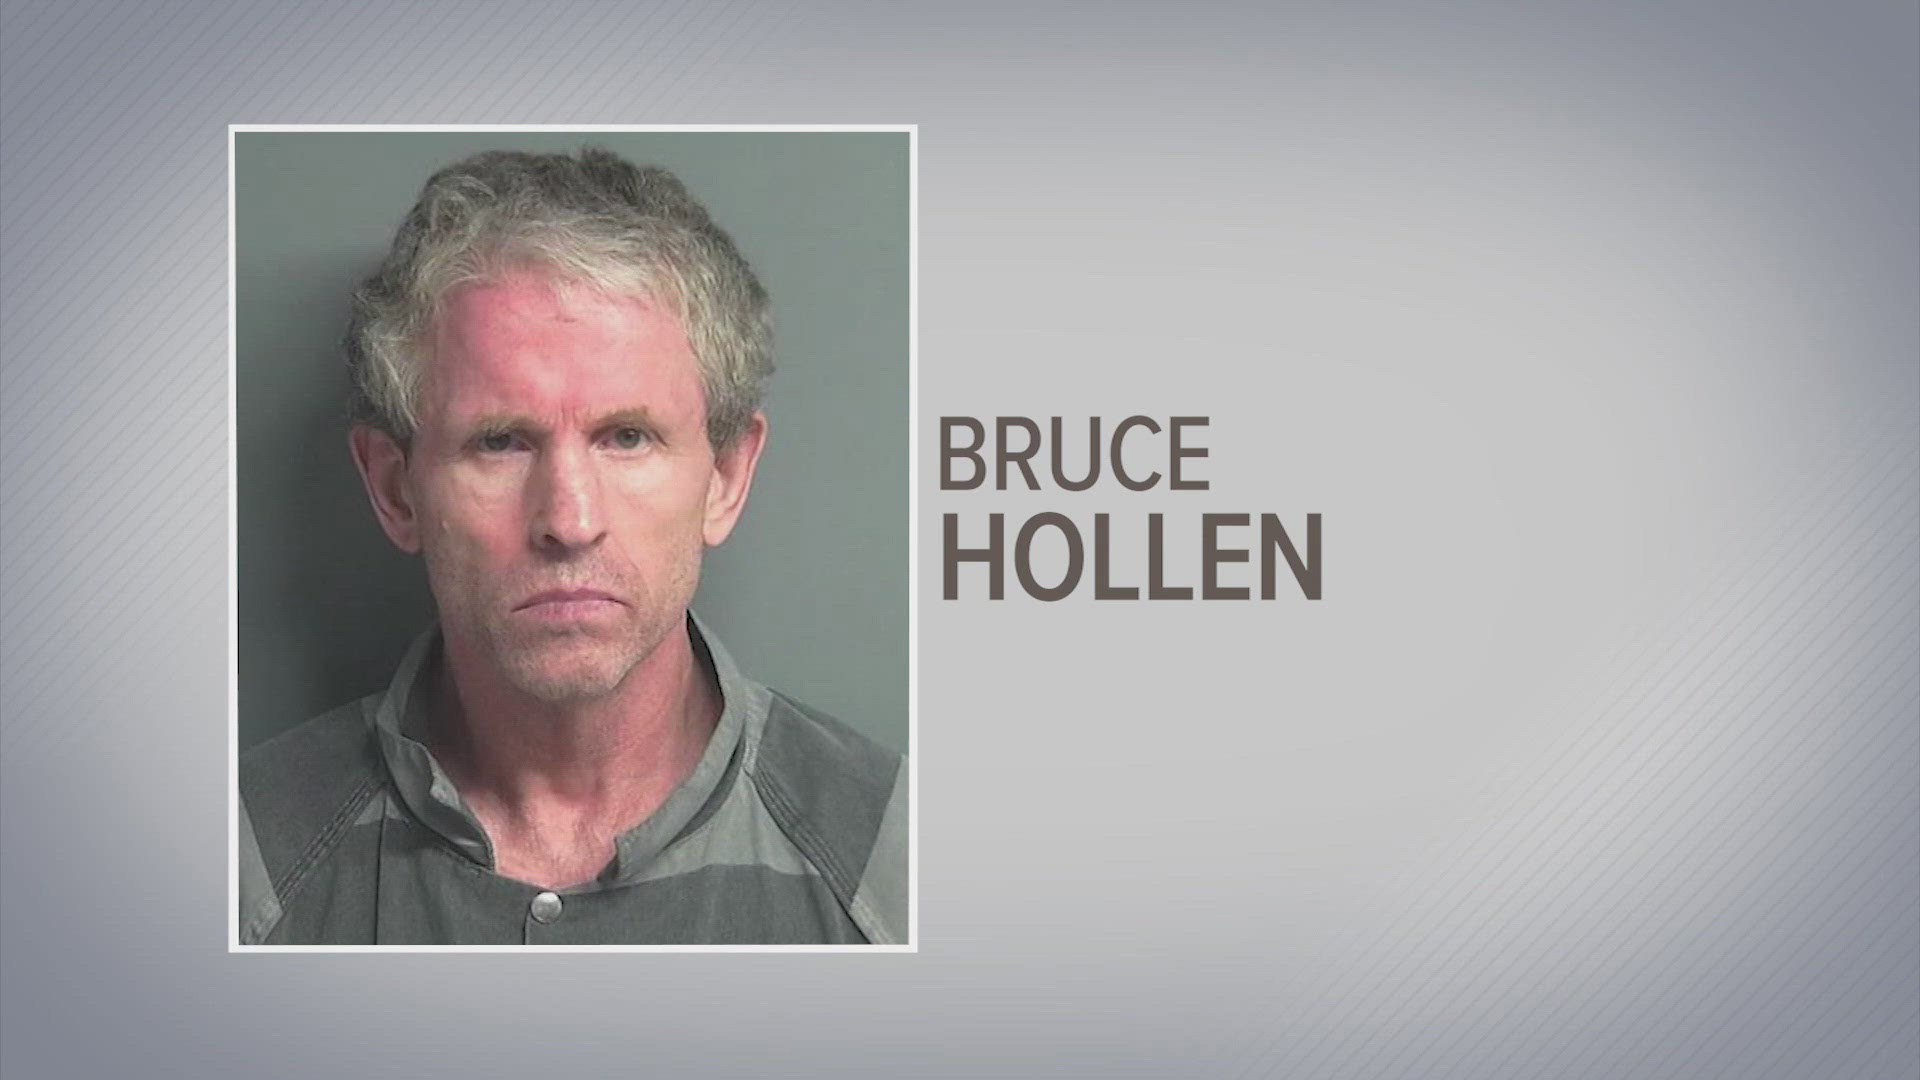 Bruce Hollen was in court Friday where his bond was set at $30,000. He had been the pastor at Calvary Chapel - The Woodlands.